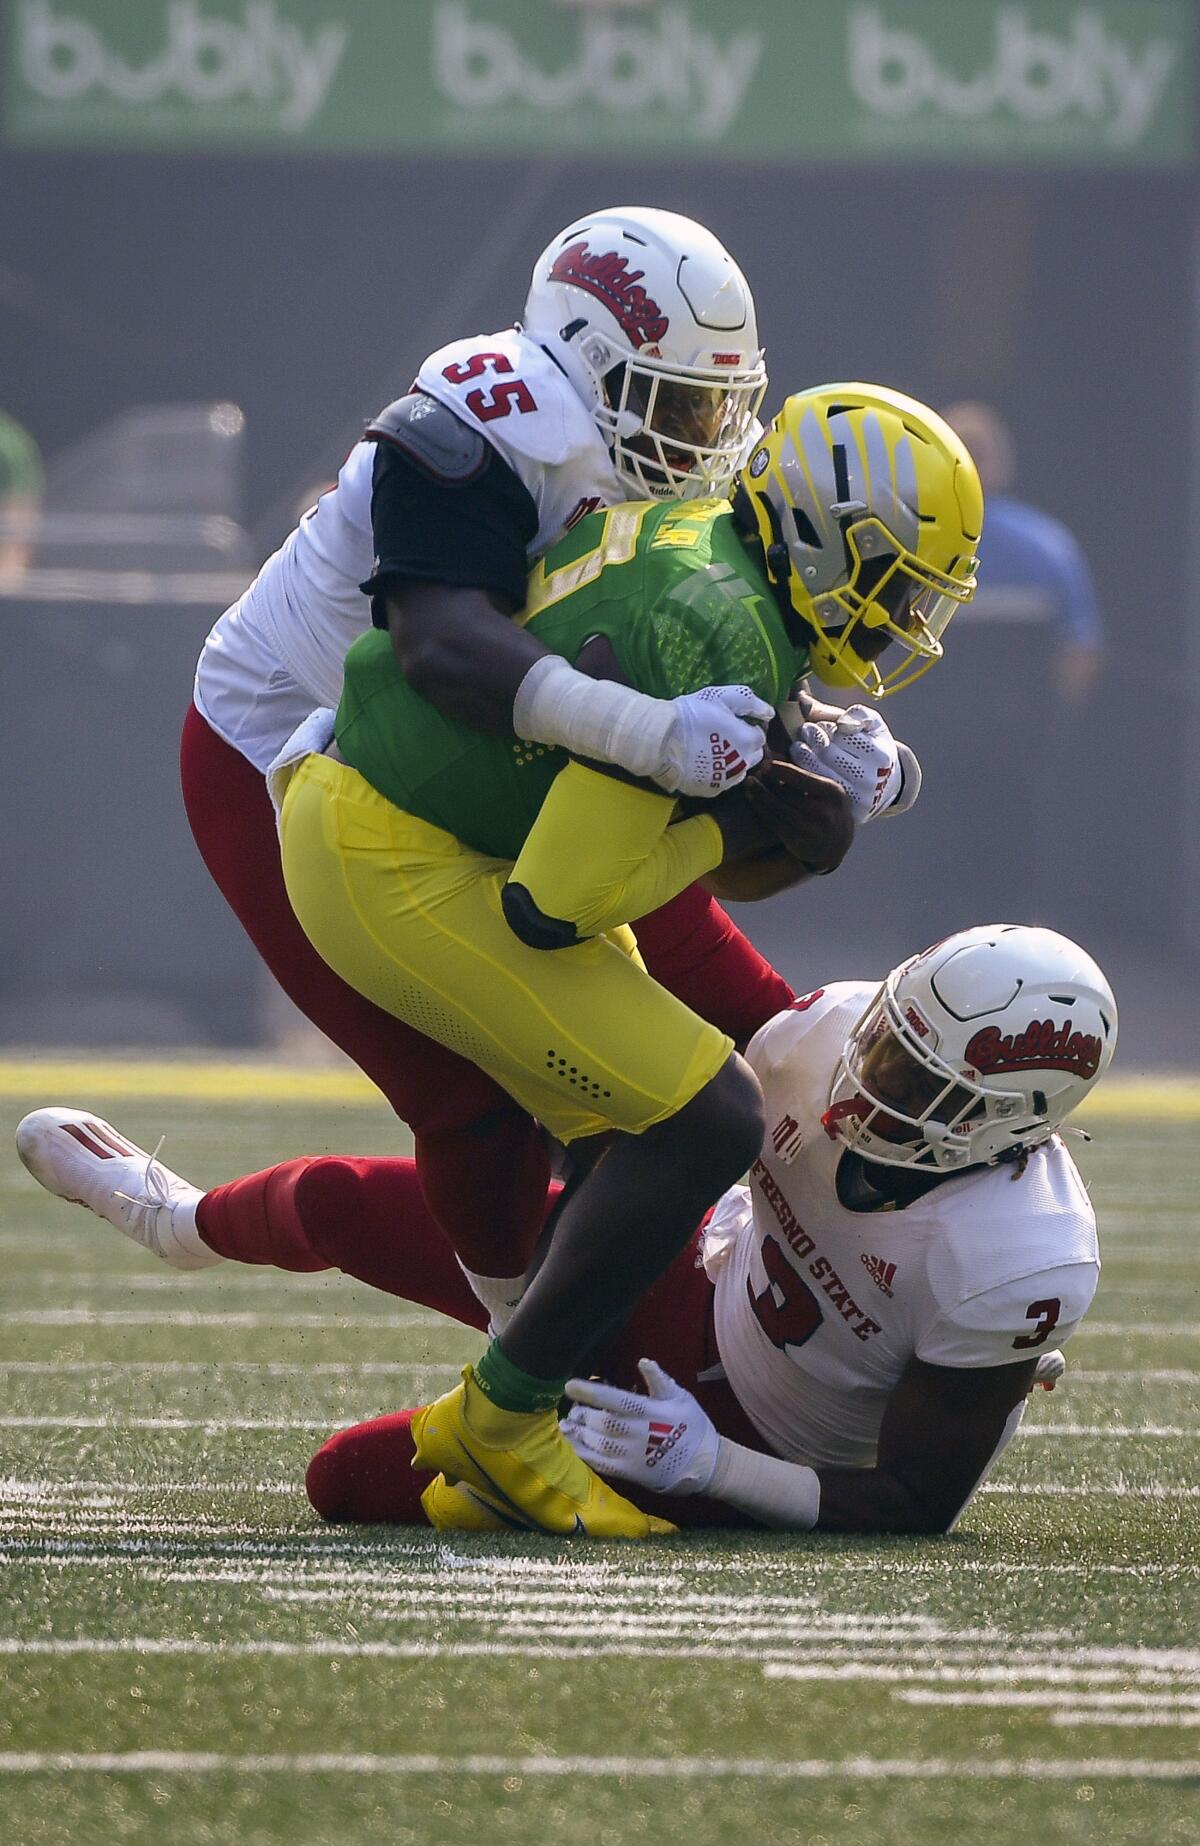 Oregon quarterback Anthony Brown (13) is wrapped up by Fresno State tackle Leonard Payne (55) and defensive end Aaron Mosby (3) during the first quarter of an NCAA college football game, Saturday, Sept. 4, 2021, in Eugene, Ore. (AP Photo/Andy Nelson)